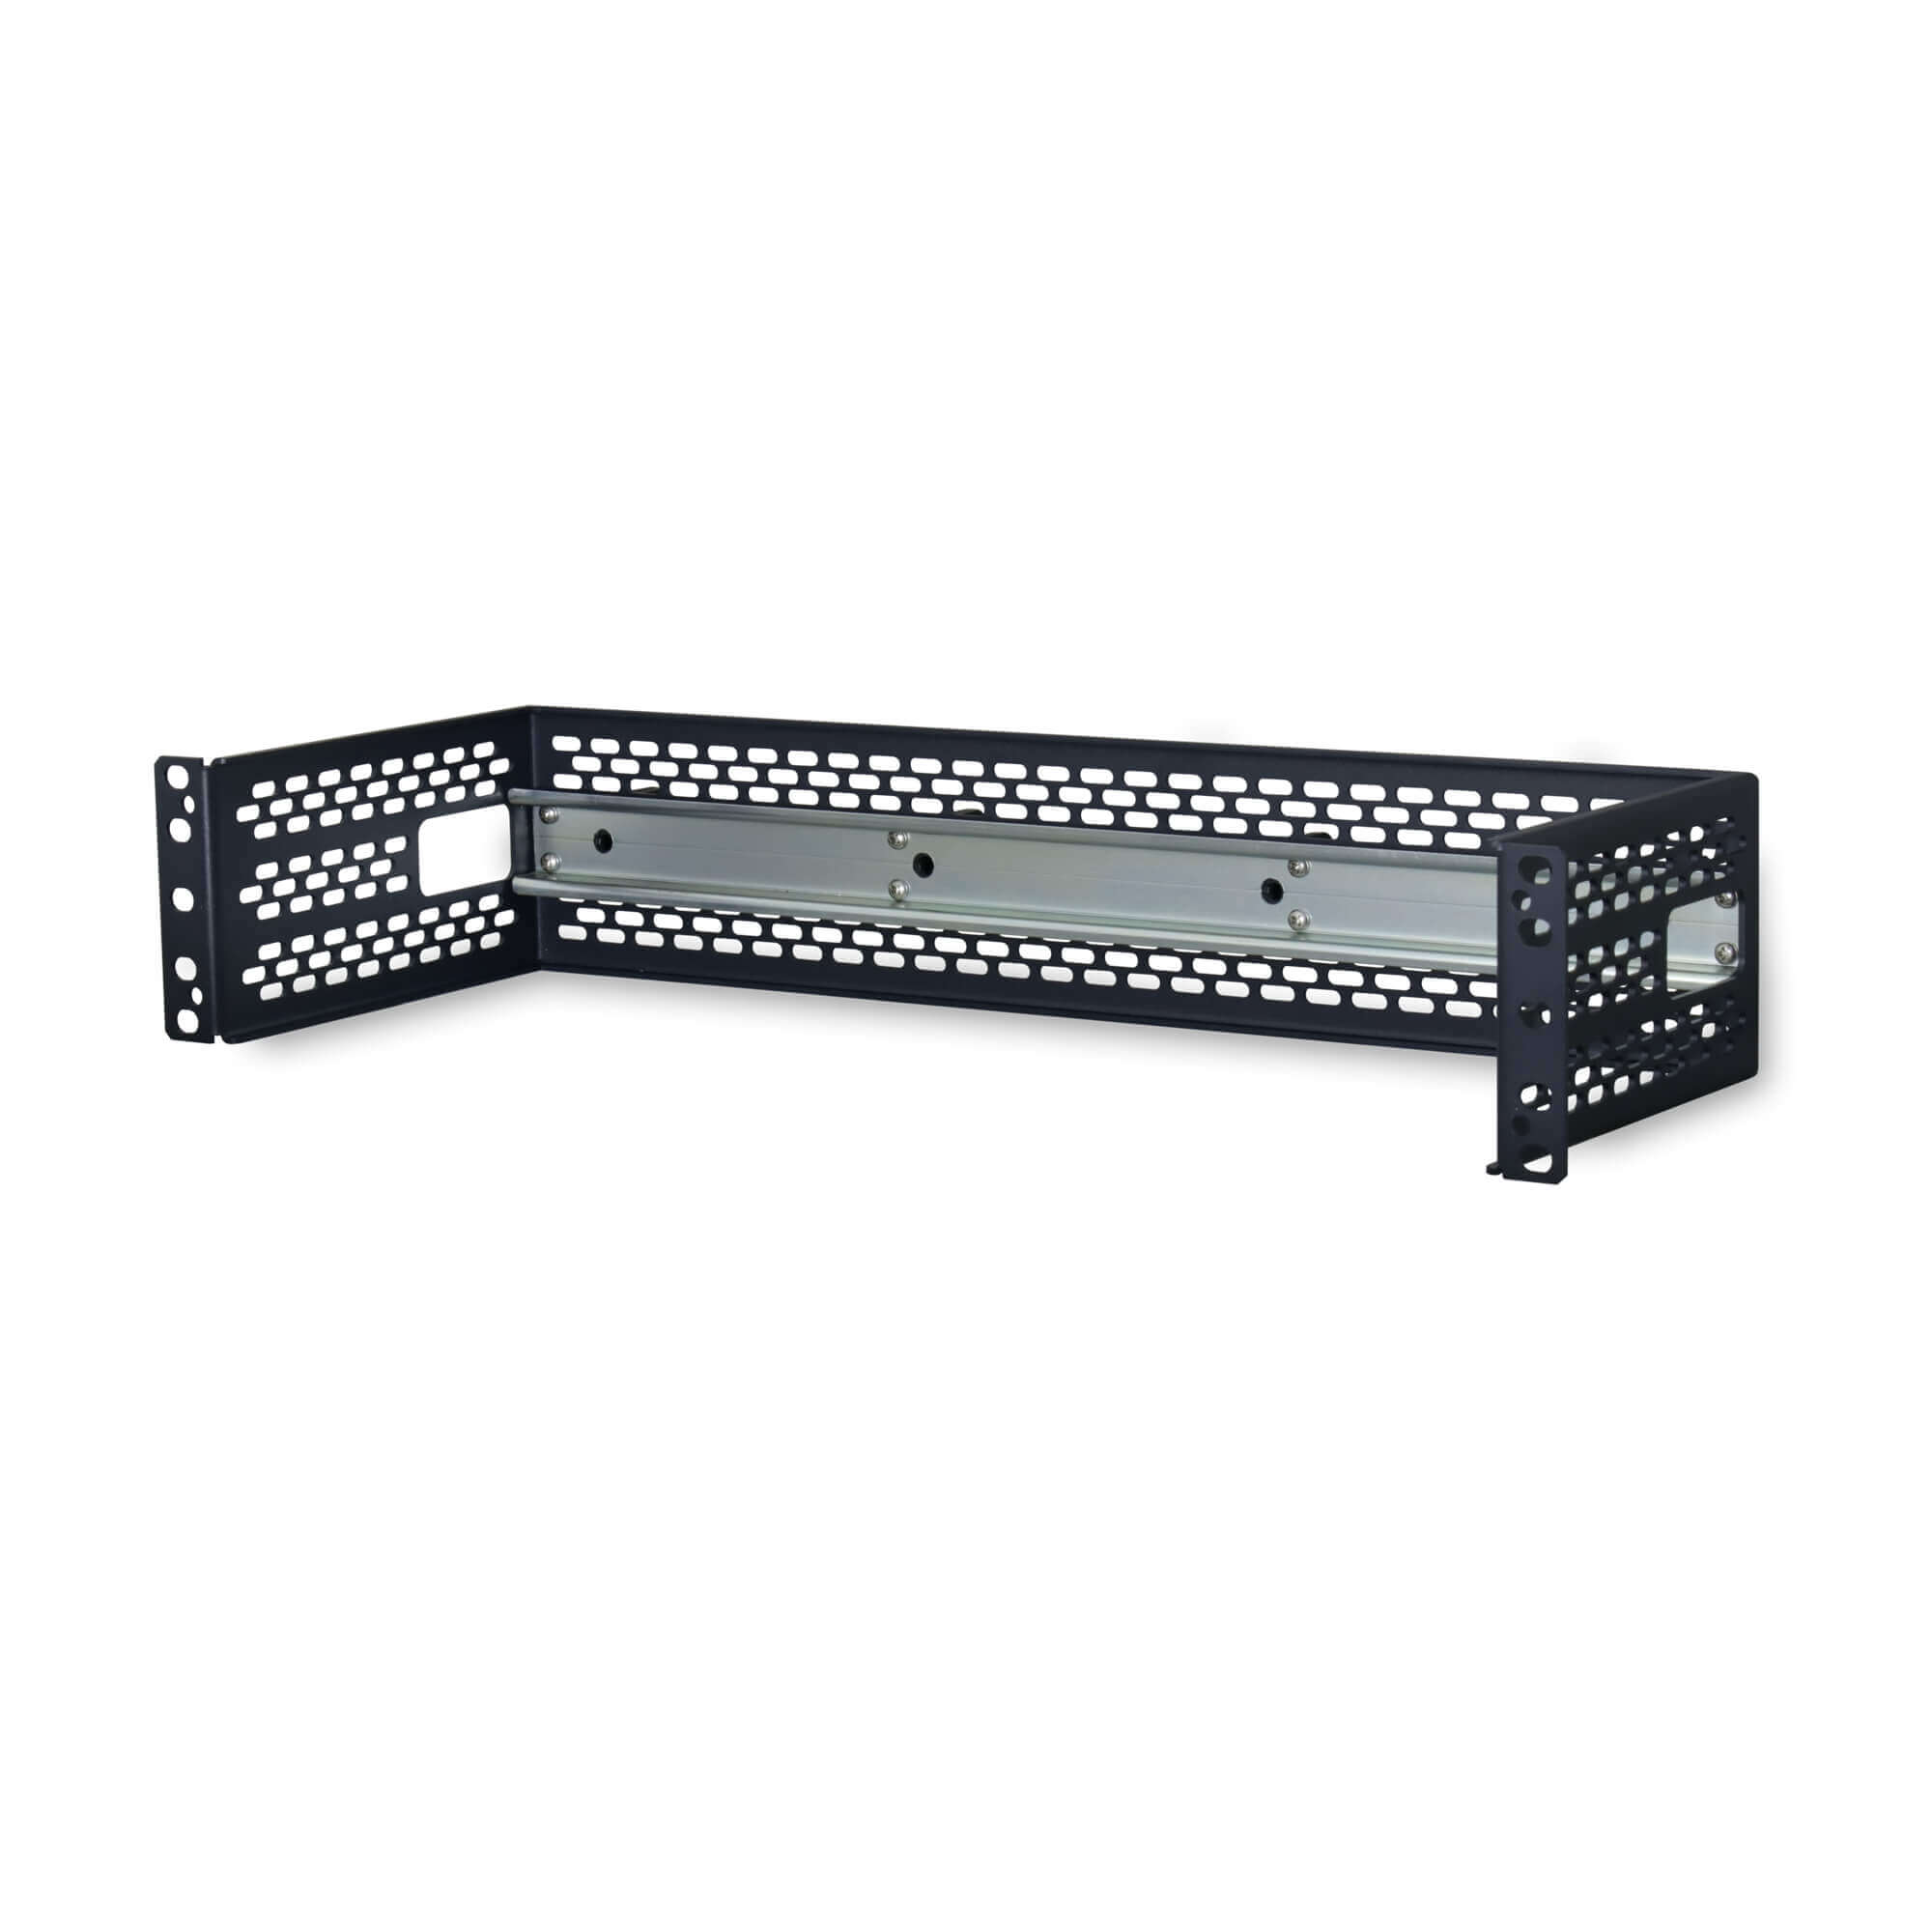 DIN RAIL Rack mount Products for Rack 19inch 